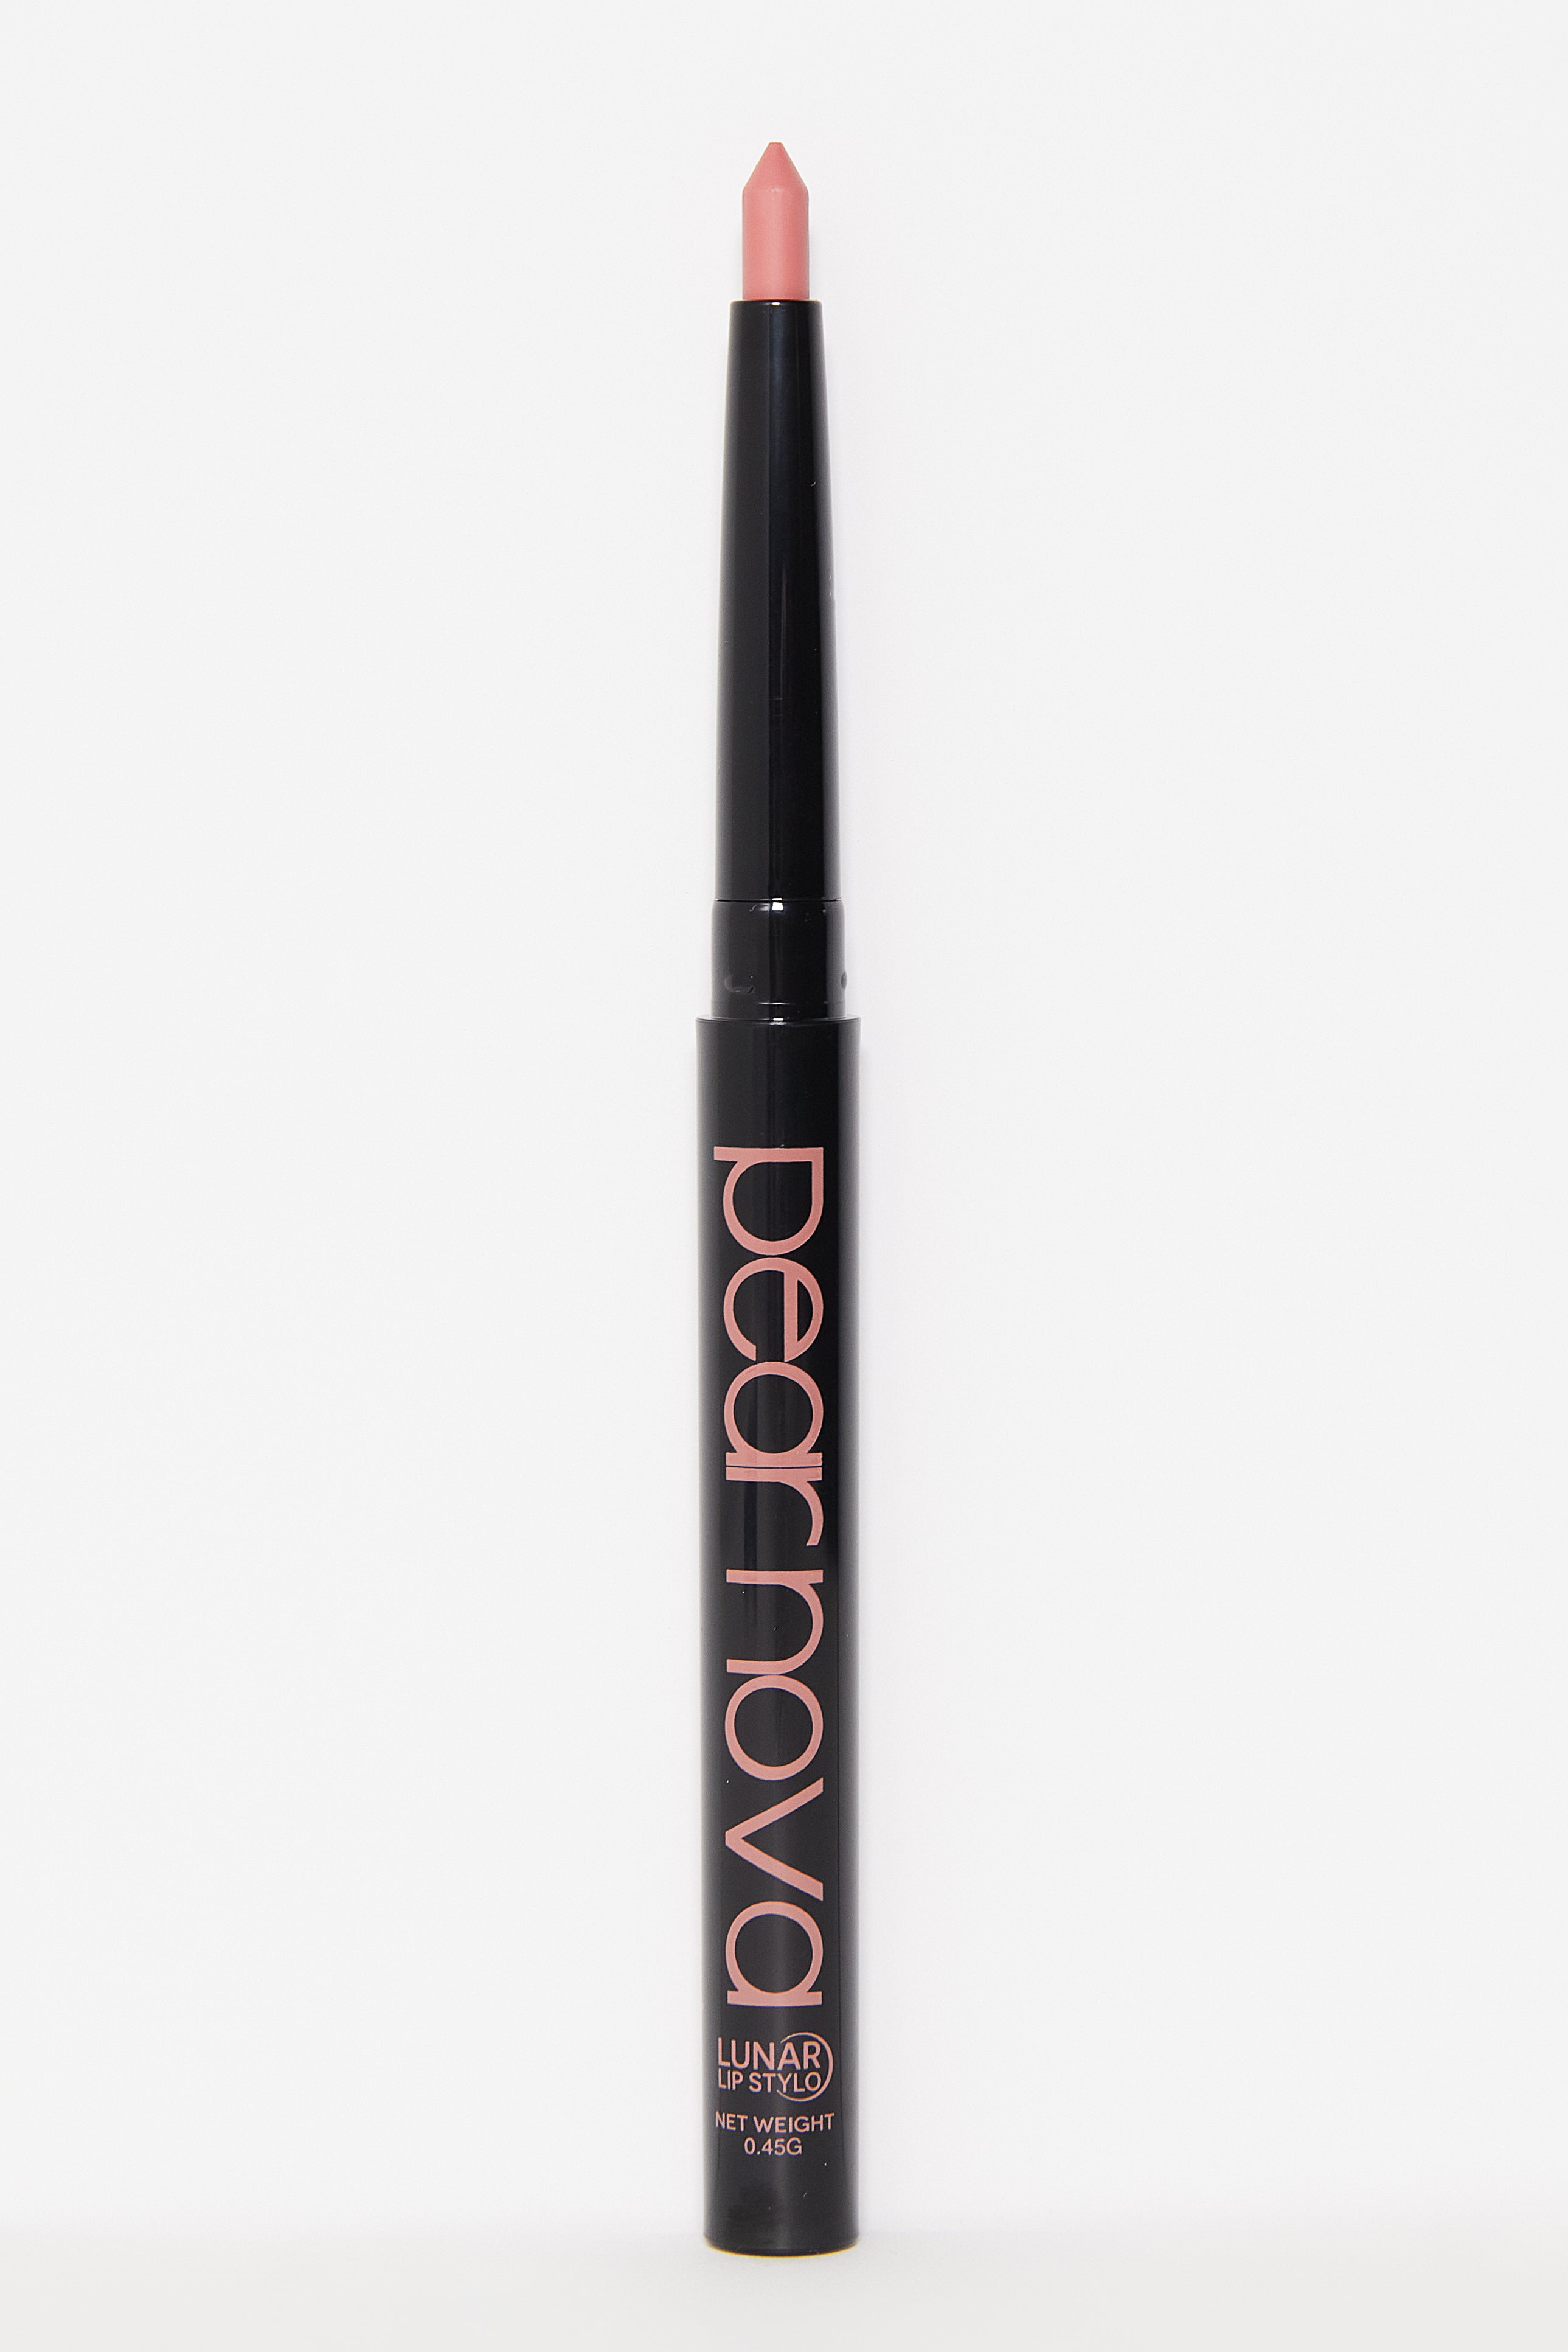 asteroid lunar lip stylo product with cap off